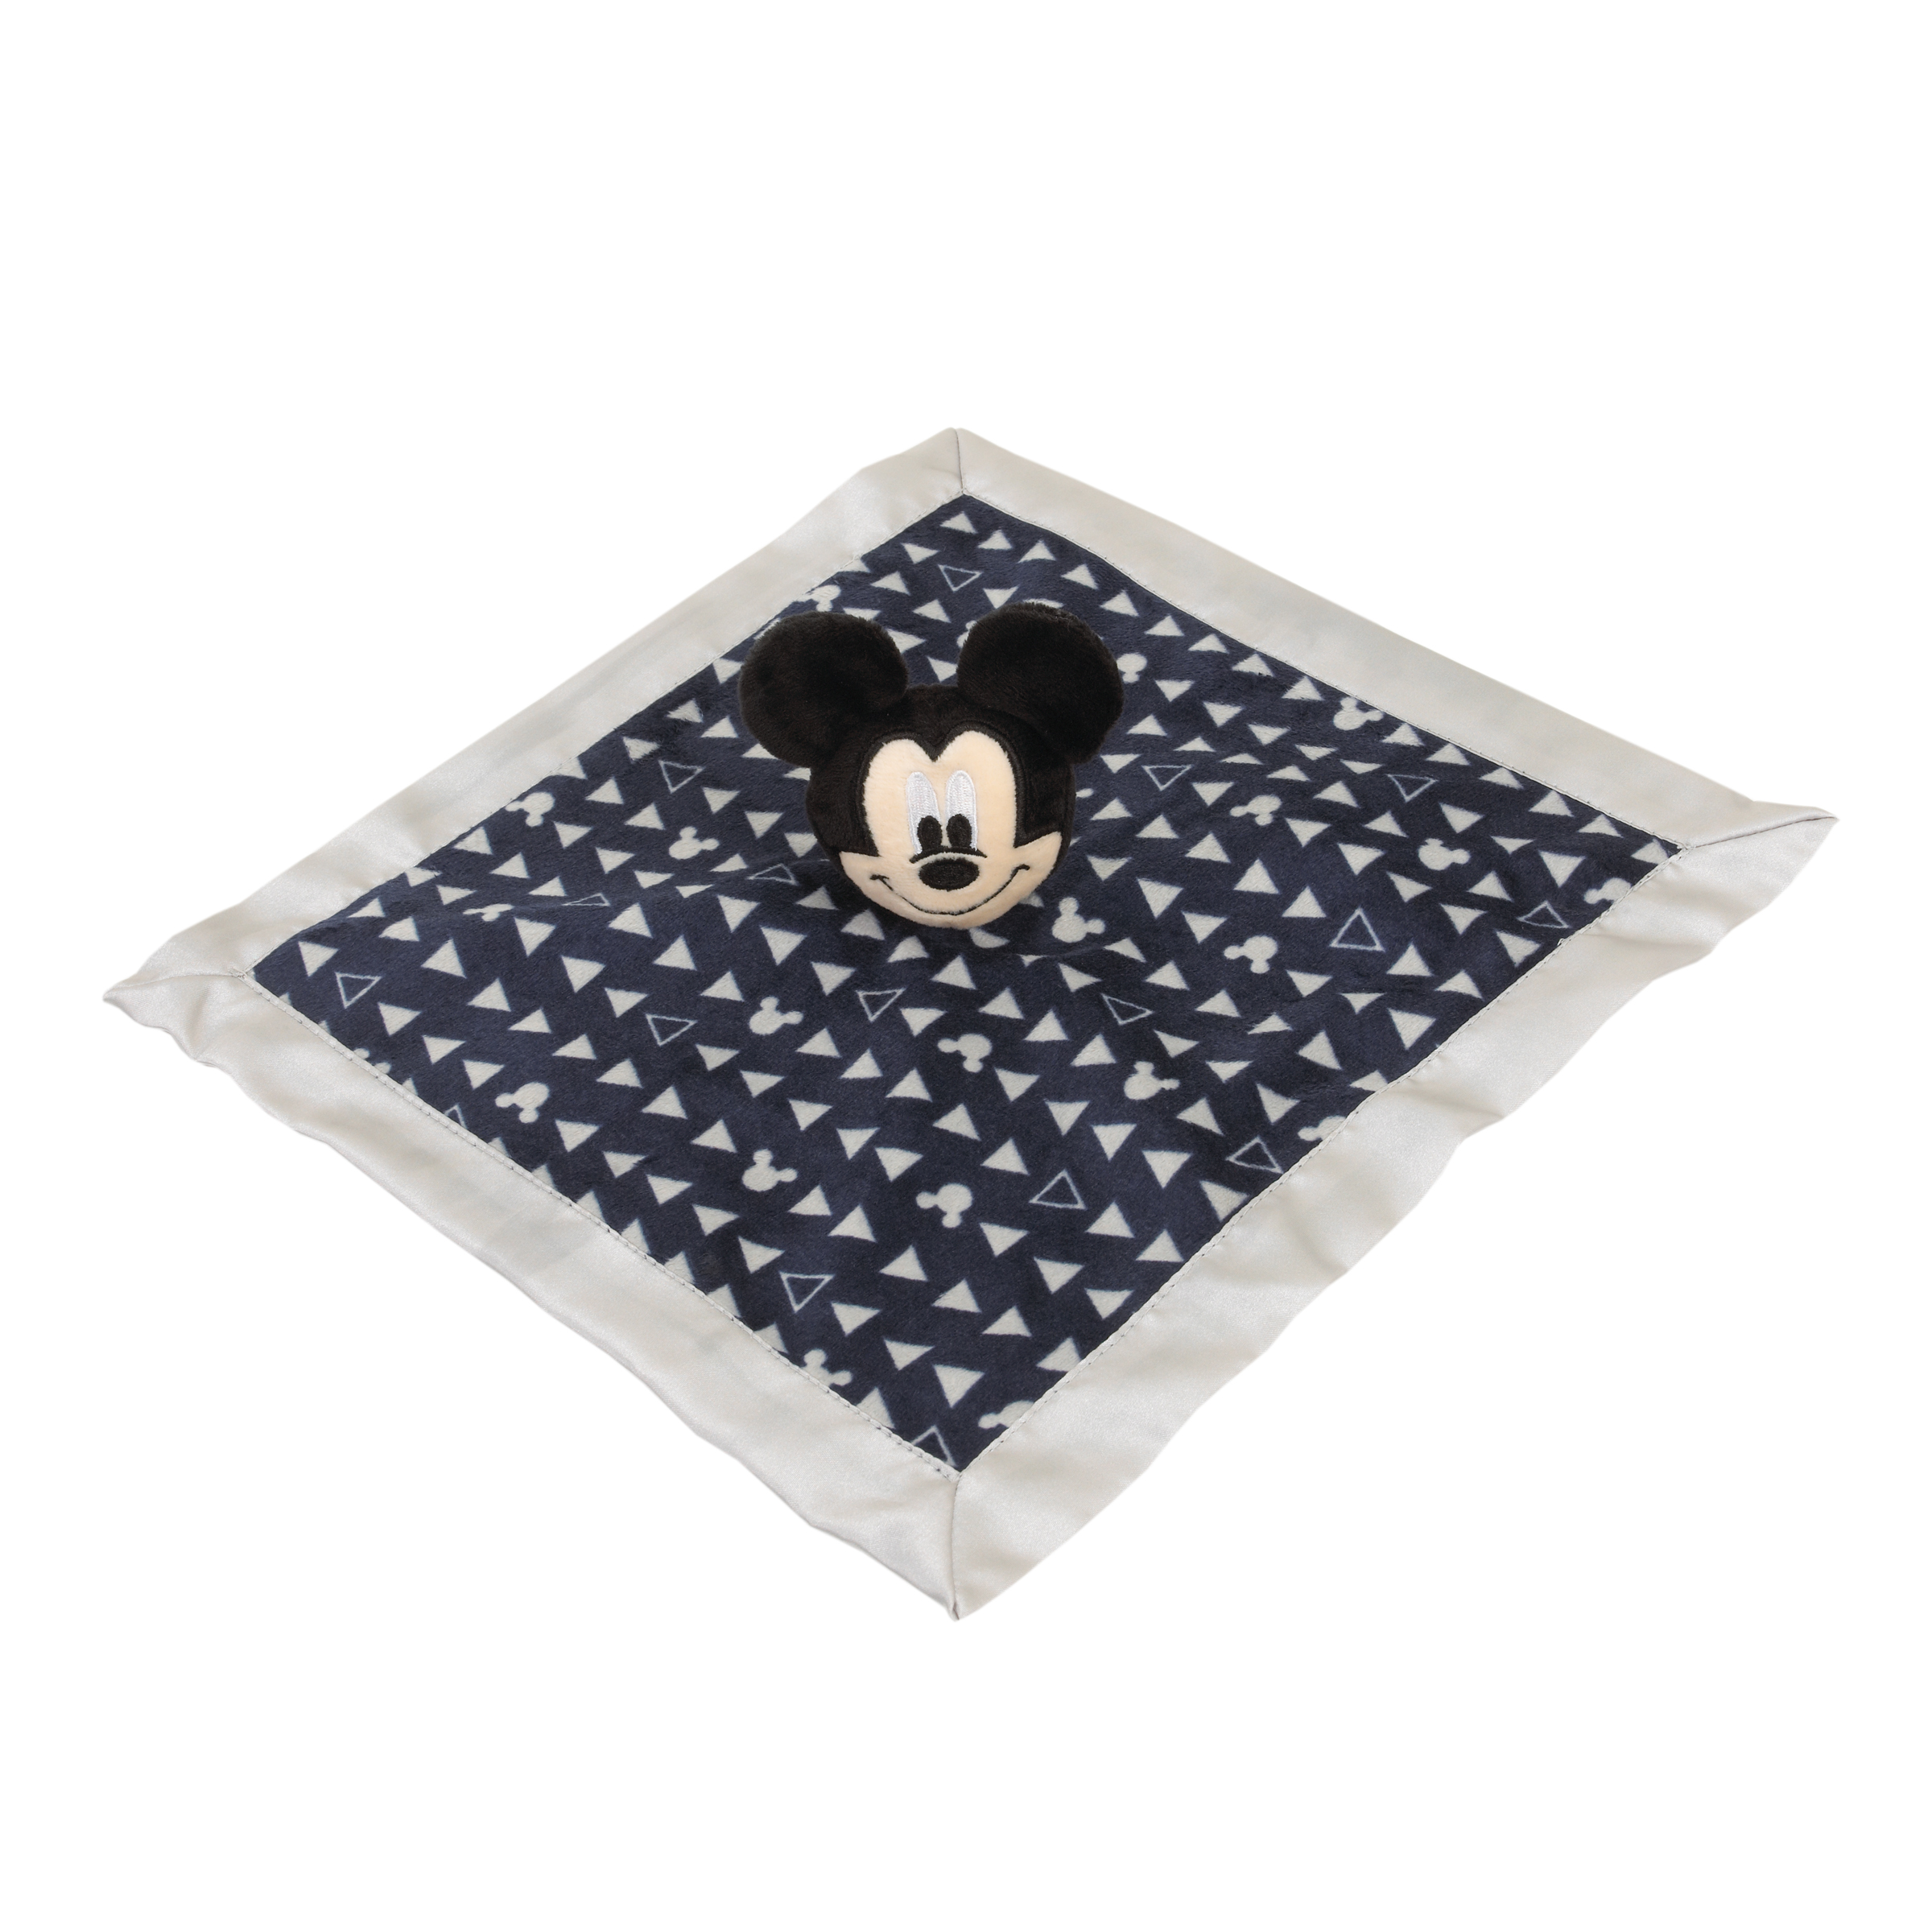 Disney Mickey Mouse Lovey Security Blanket, Navy/Grey - image 4 of 4